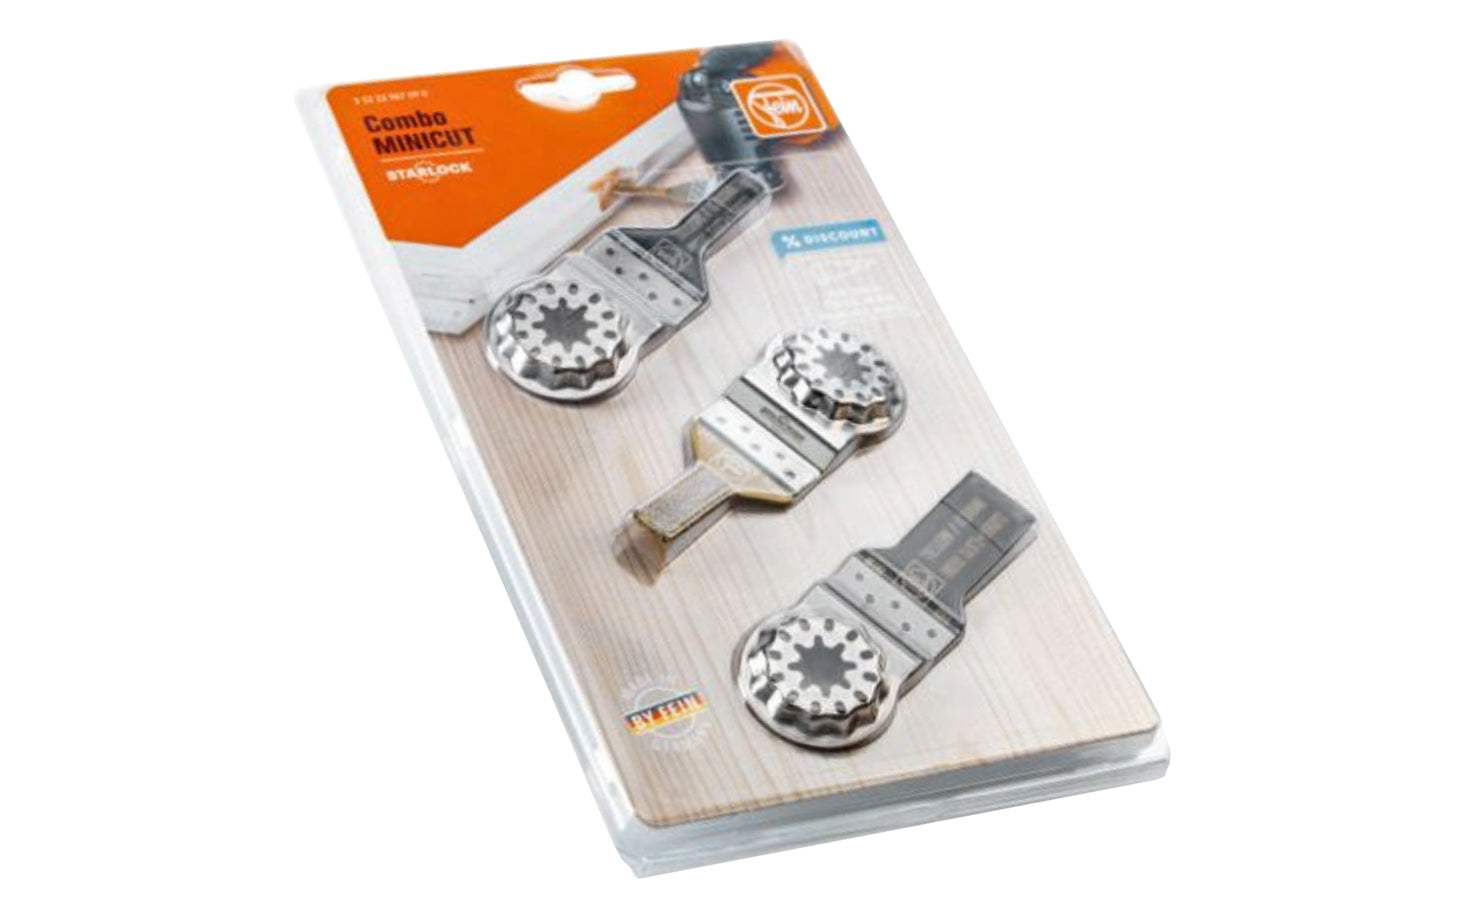 Fein Tools "Combo MiniCut" Set ideal for small cut-outs & work in narrow spaces, including various installation work, switch installation, model-building, & more. 13/16" & 3/8" E-Cut Long Life Wood / Metal Saw Blades, 3/8" Carbide Rasp blade.   Made in Germany. "Starlock" Mounting system. 35222967090. 4014586440446